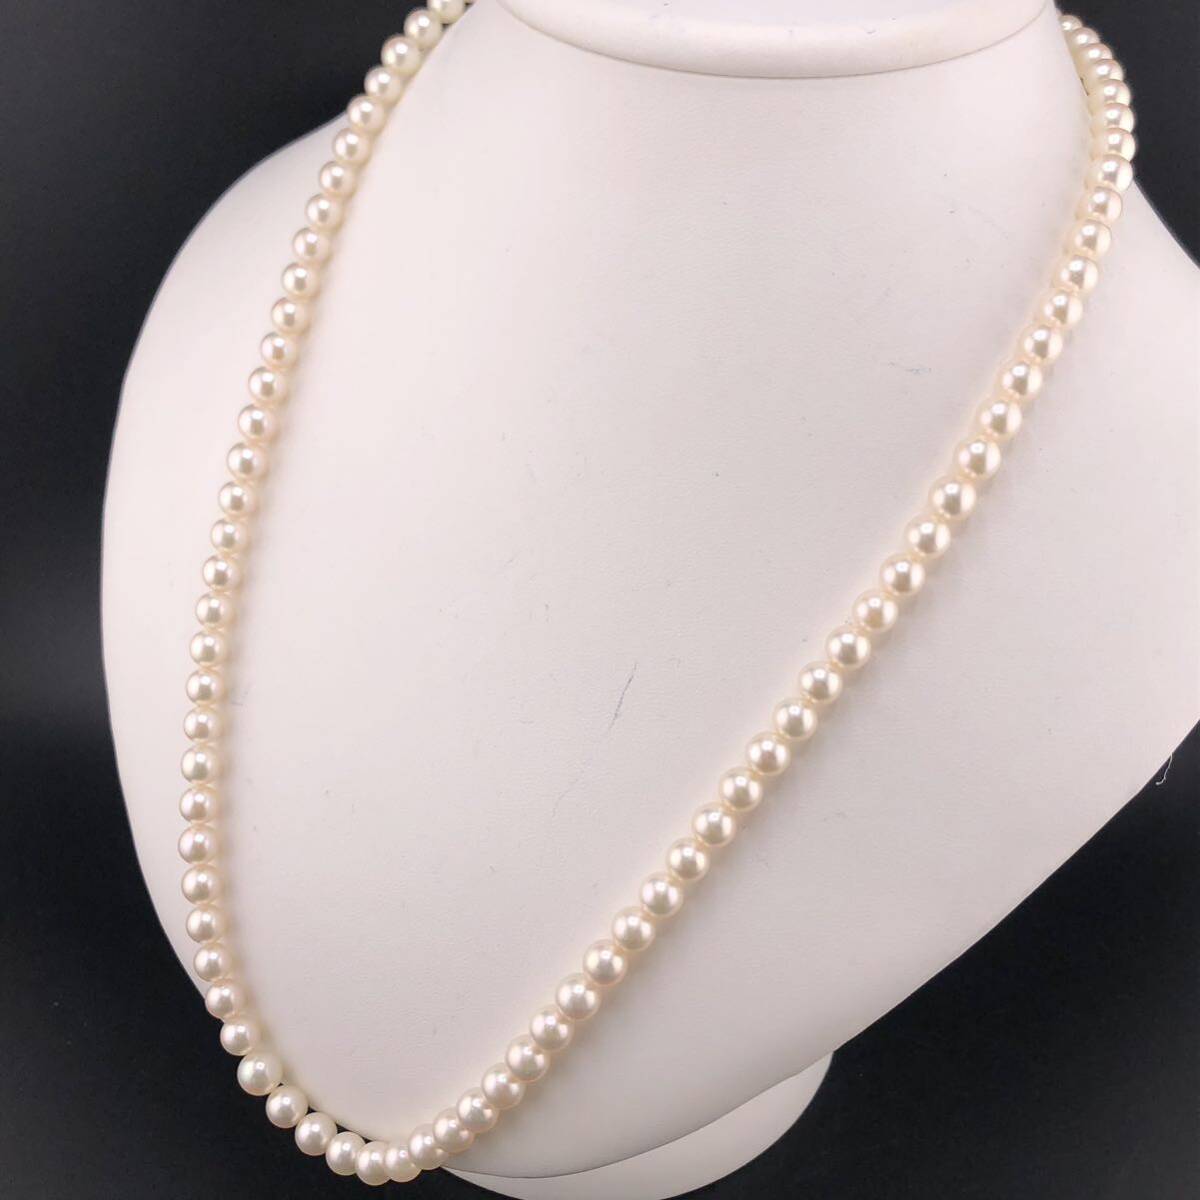 P04-0019 アコヤパールネックレス 6.5mm~7.0mm 59cm 39.6g ( アコヤ真珠 Pearl necklace SILVER )_画像3